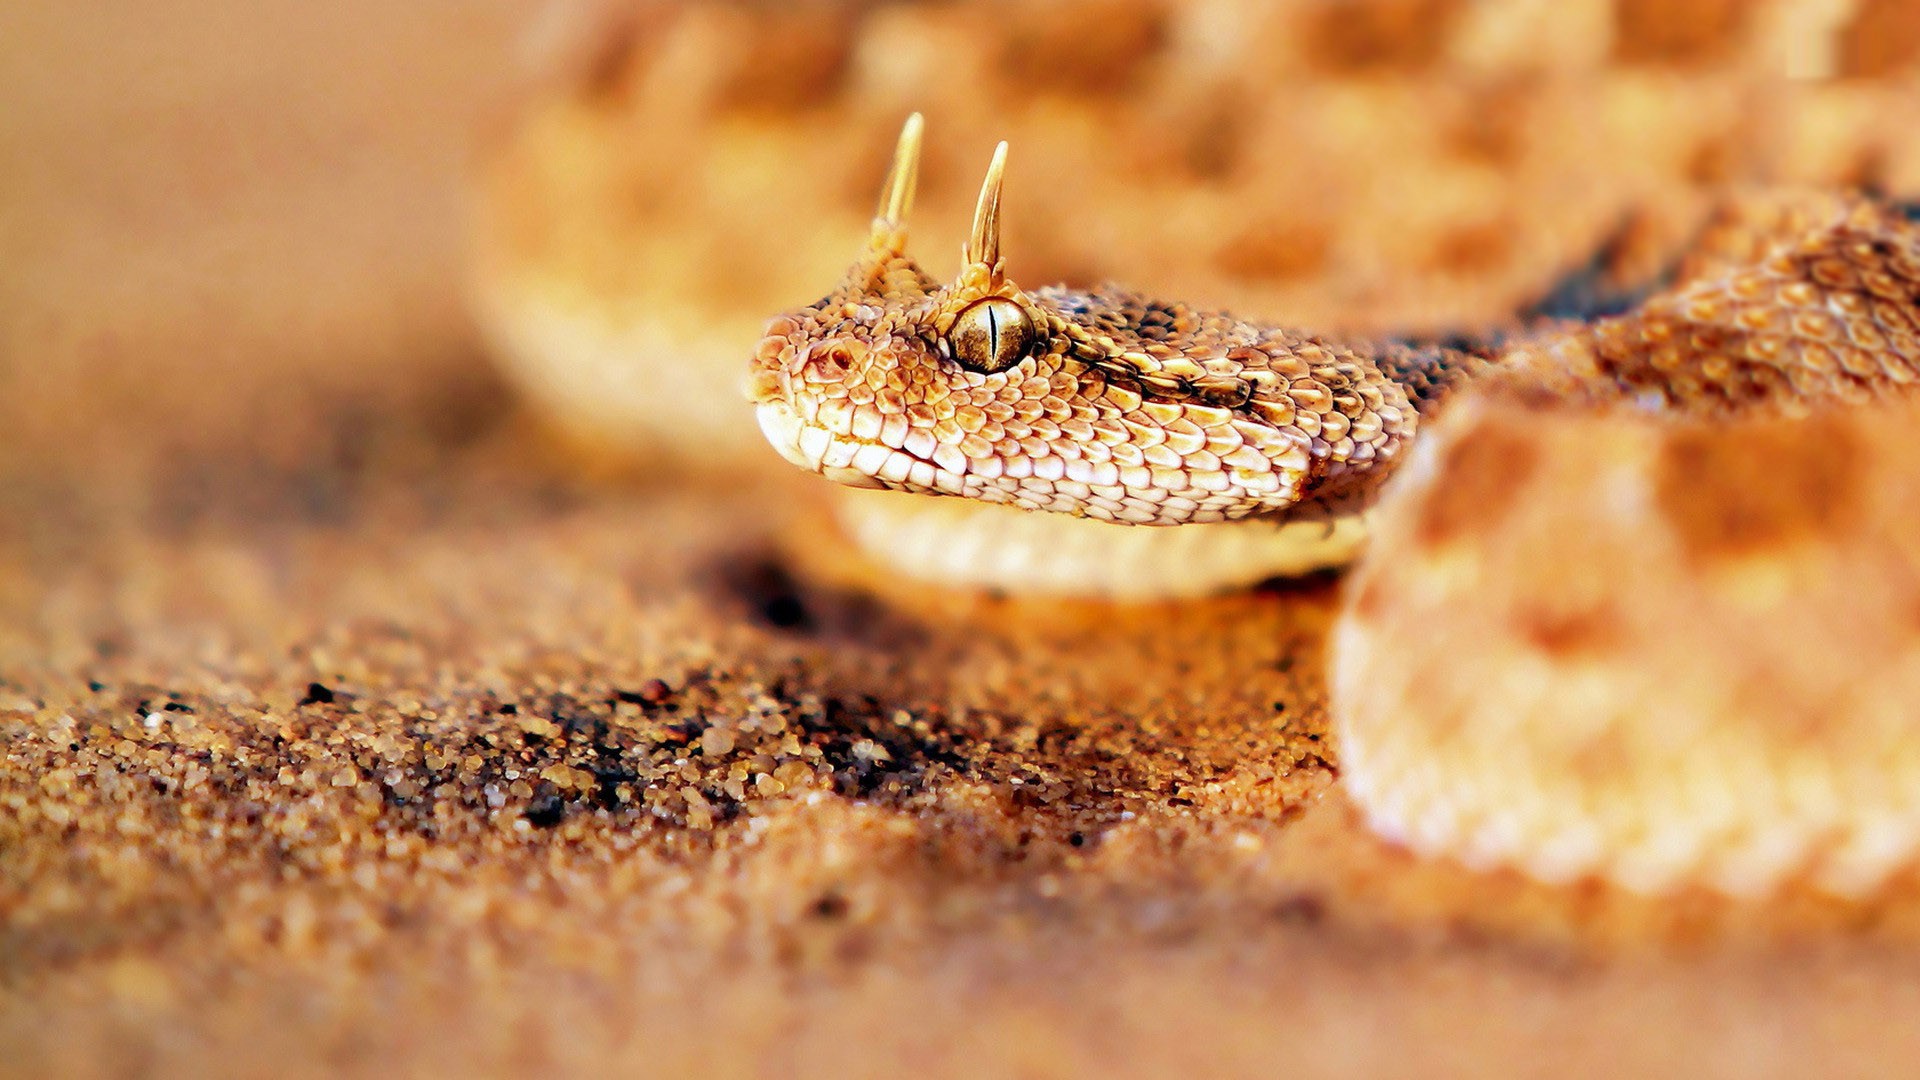 General 1920x1080 animals snake reptiles sand